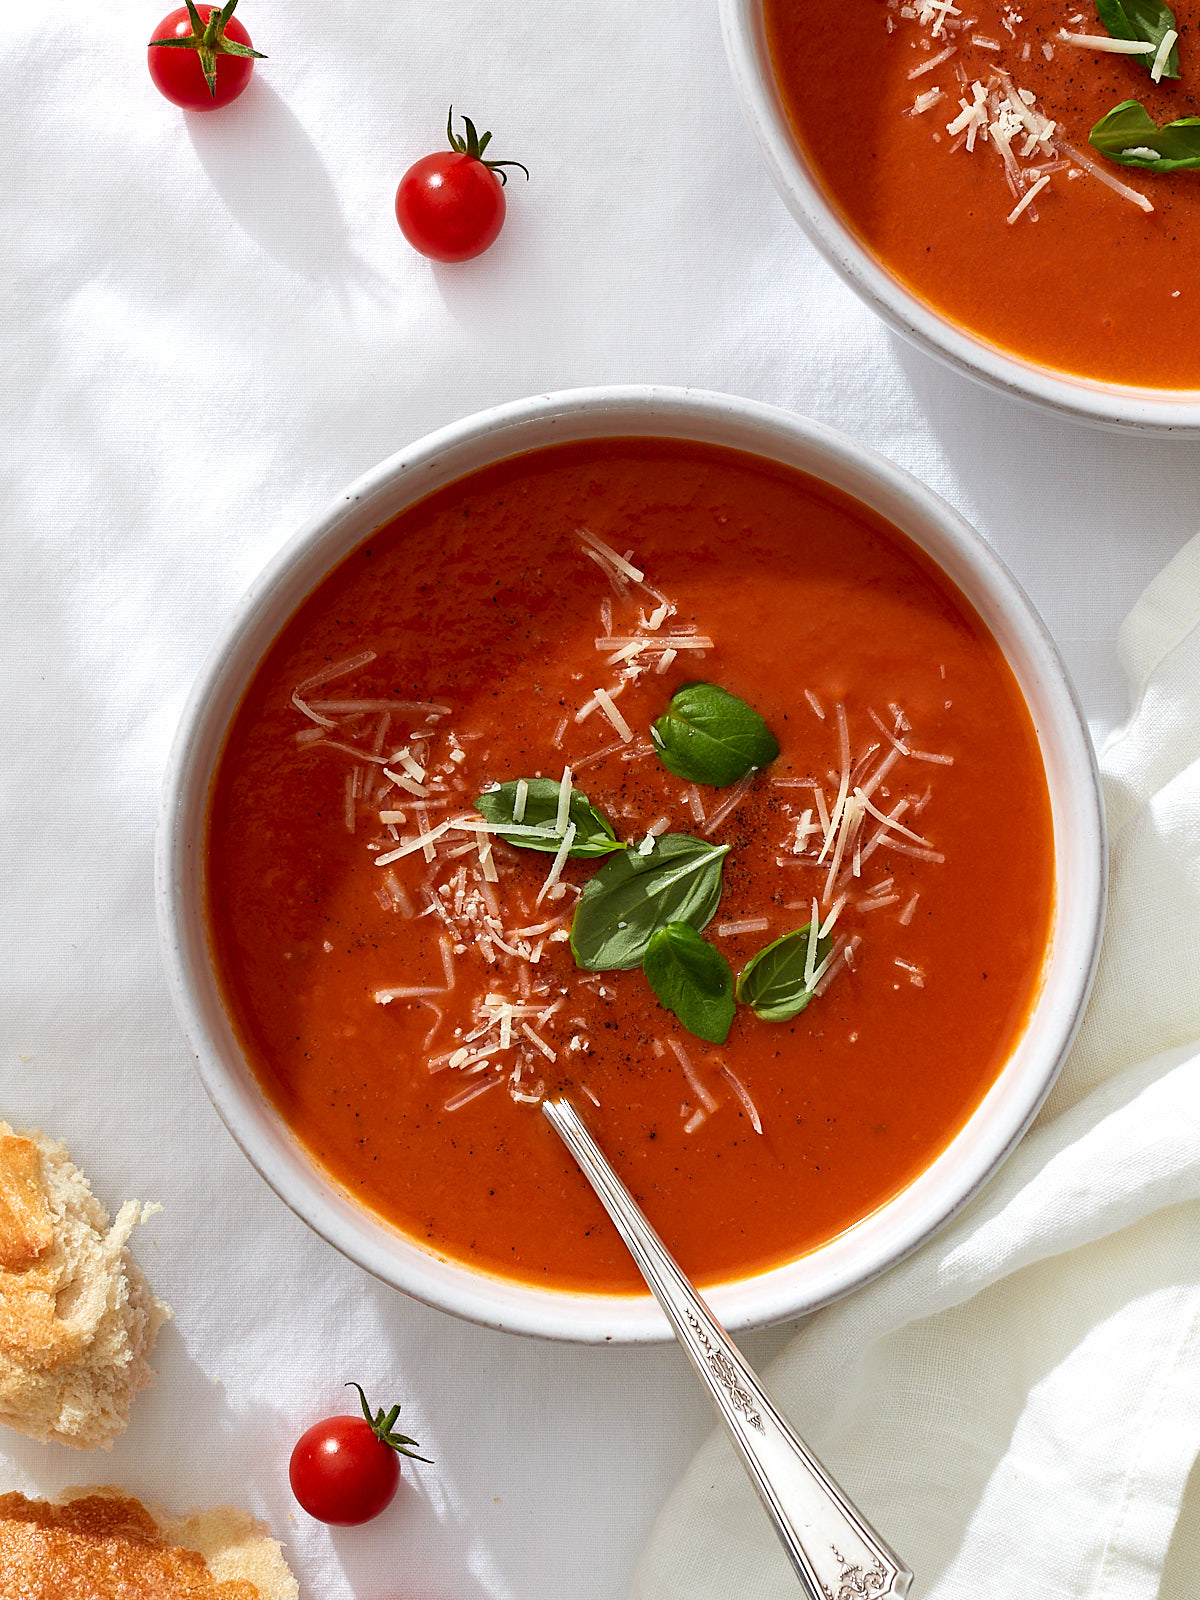 Two bowls of homemade roasted tomato soup with cracked black pepper, fresh basil leaves, and grated parmesan on a white linen table.